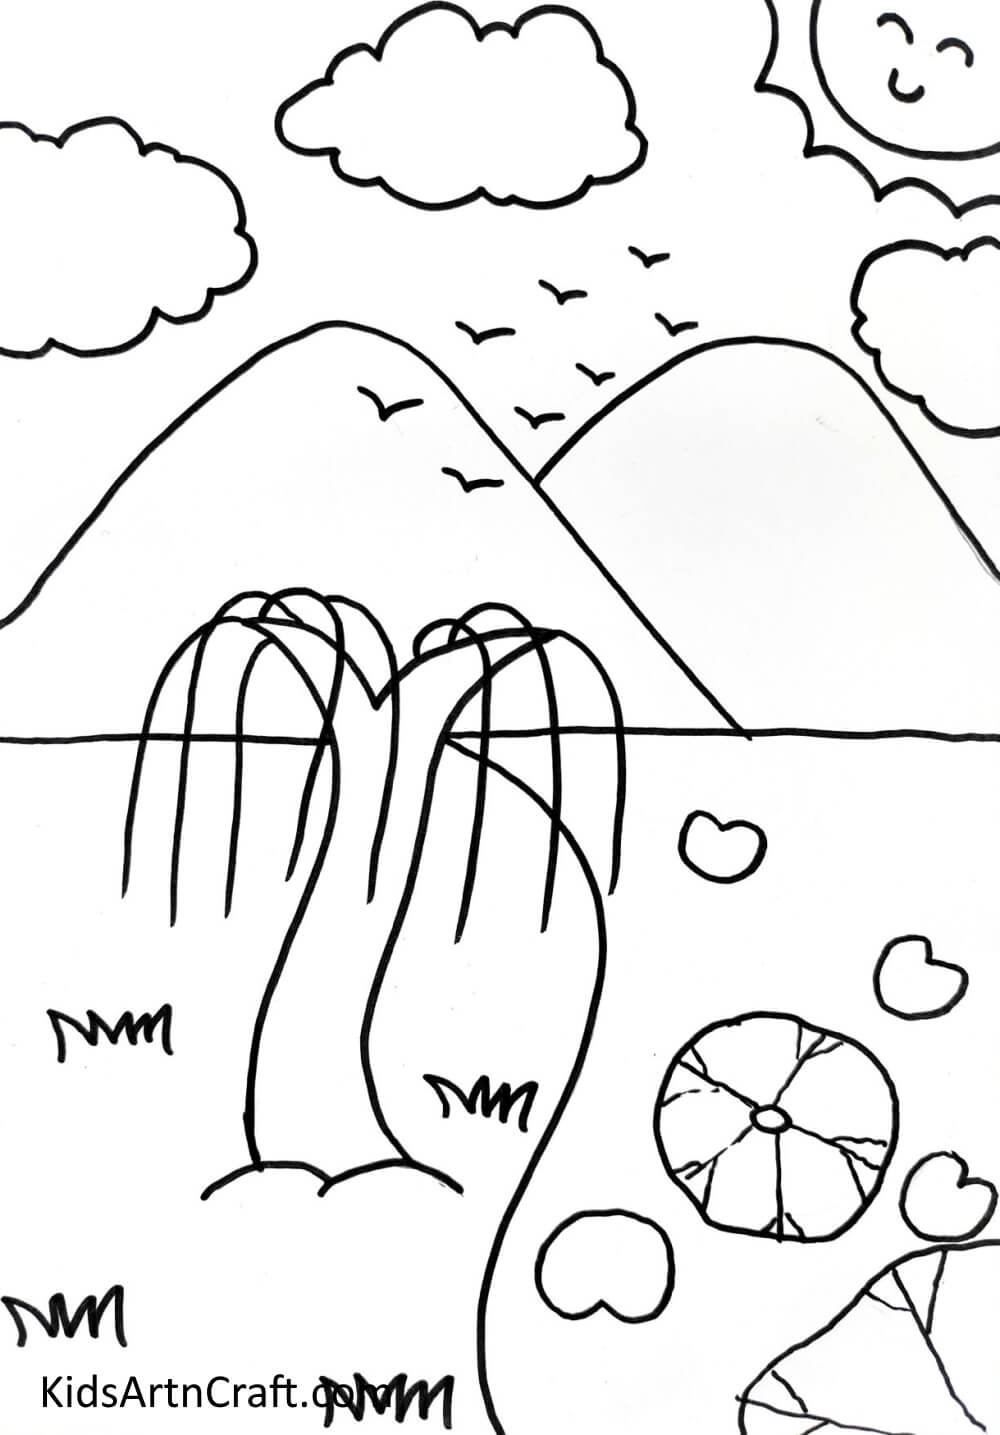 Drawing Mountains, Clouds, Birds And SunGorgeous Hill Rendering and Scene For Toddlers 